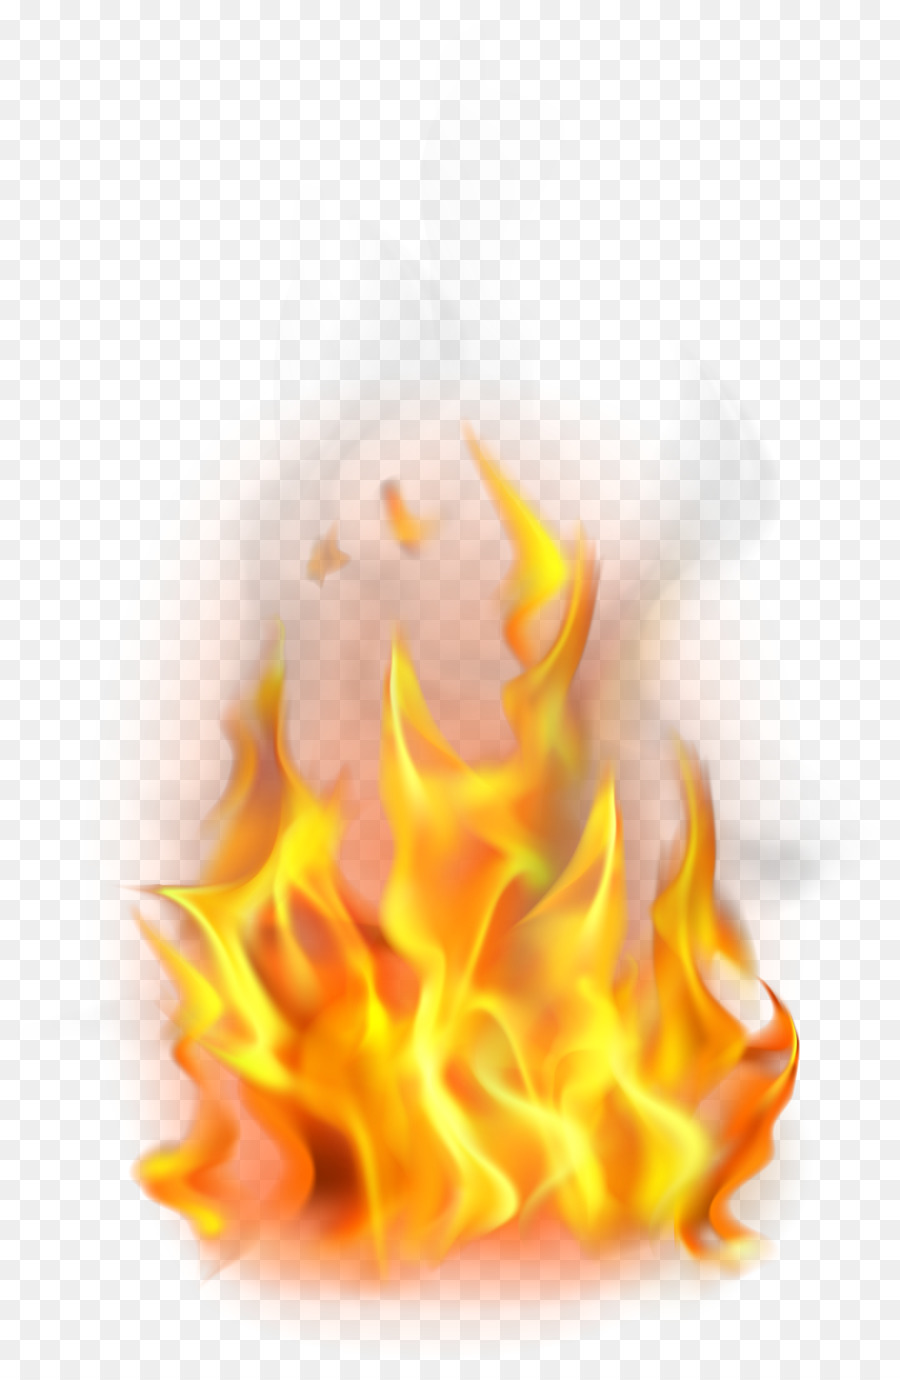 Free Fire Gif Transparent Background, Download Free Fire Gif